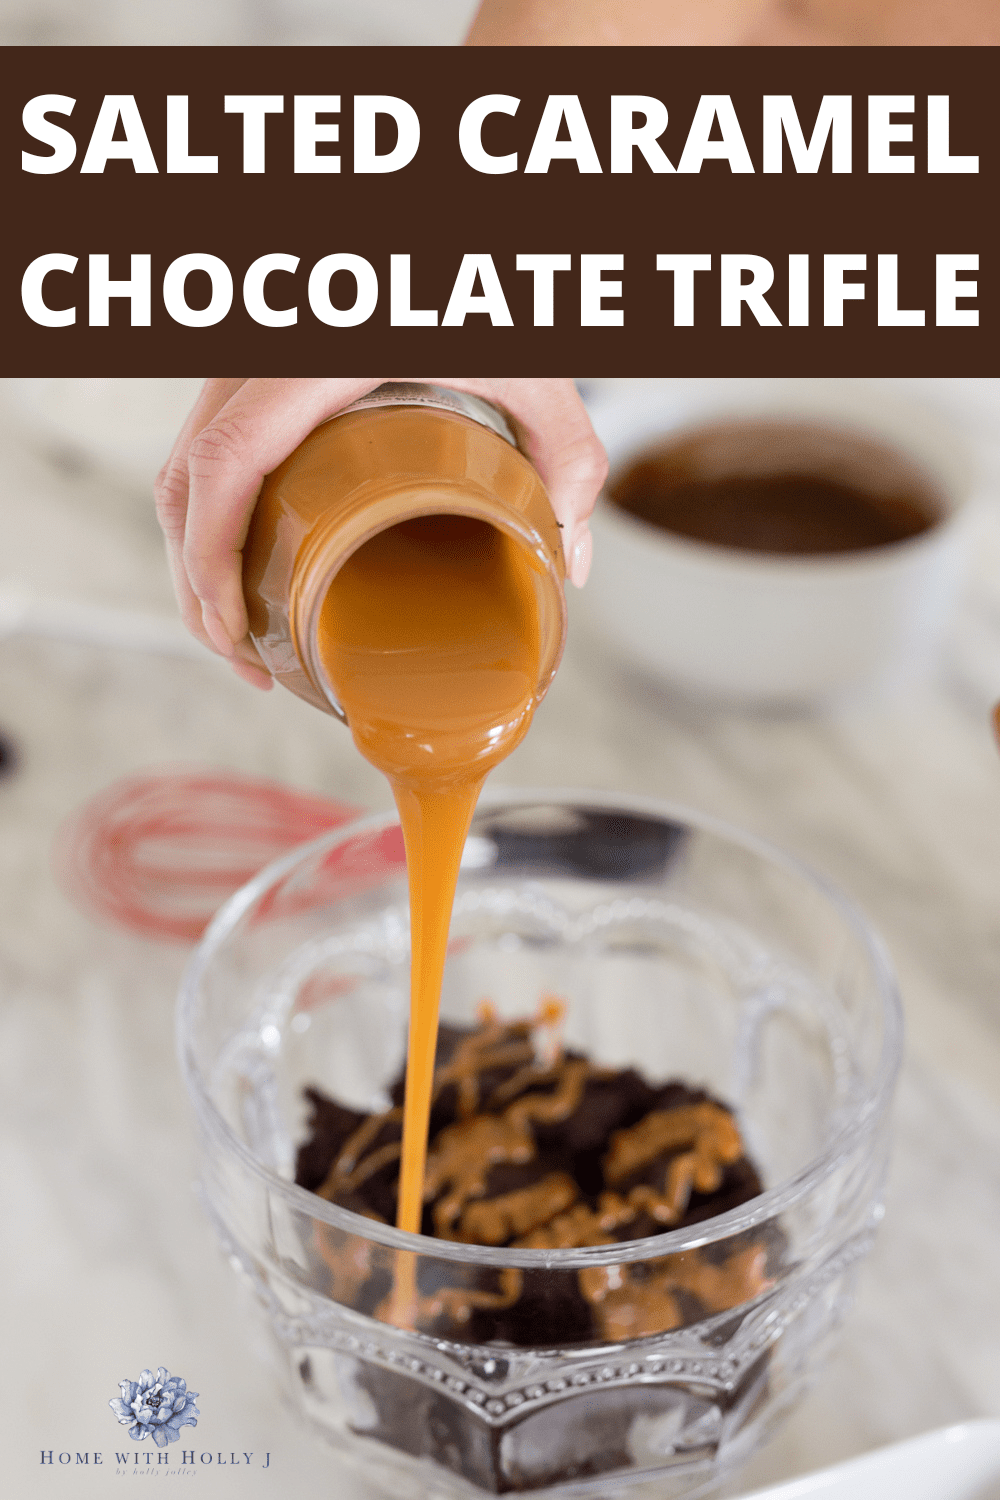 Satisfy your sweet tooth with this delicious and easy to make salted caramel chocolate trifle recipe. Follow our simple instructions here.